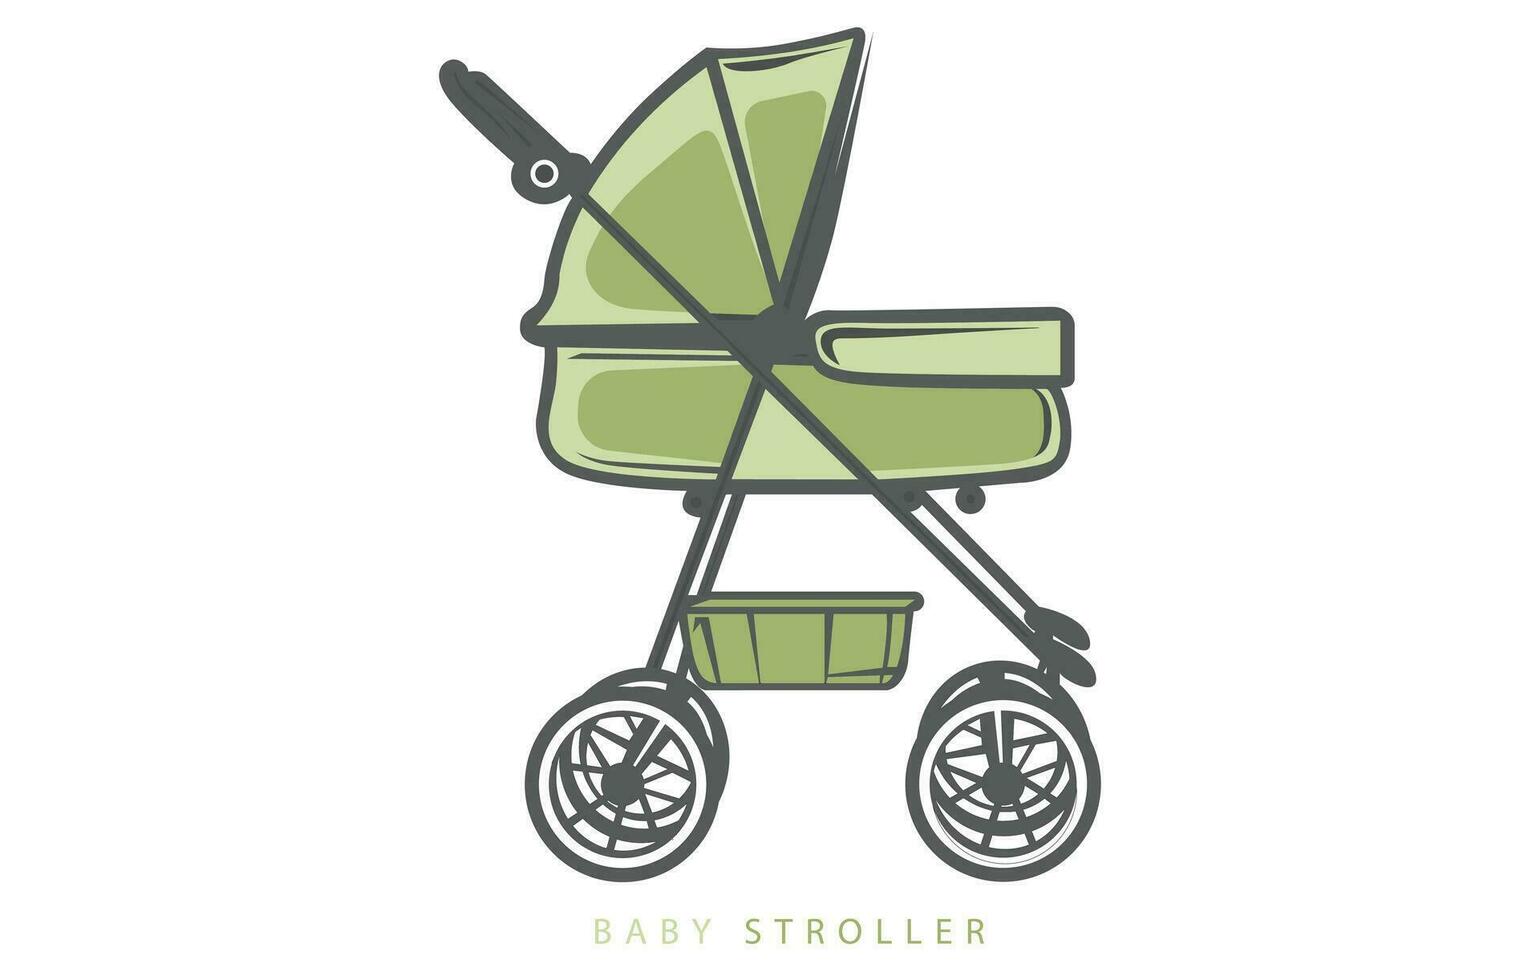 Baby shop vector illustration icon. Simple kids store logo with baby carriage, stroller.